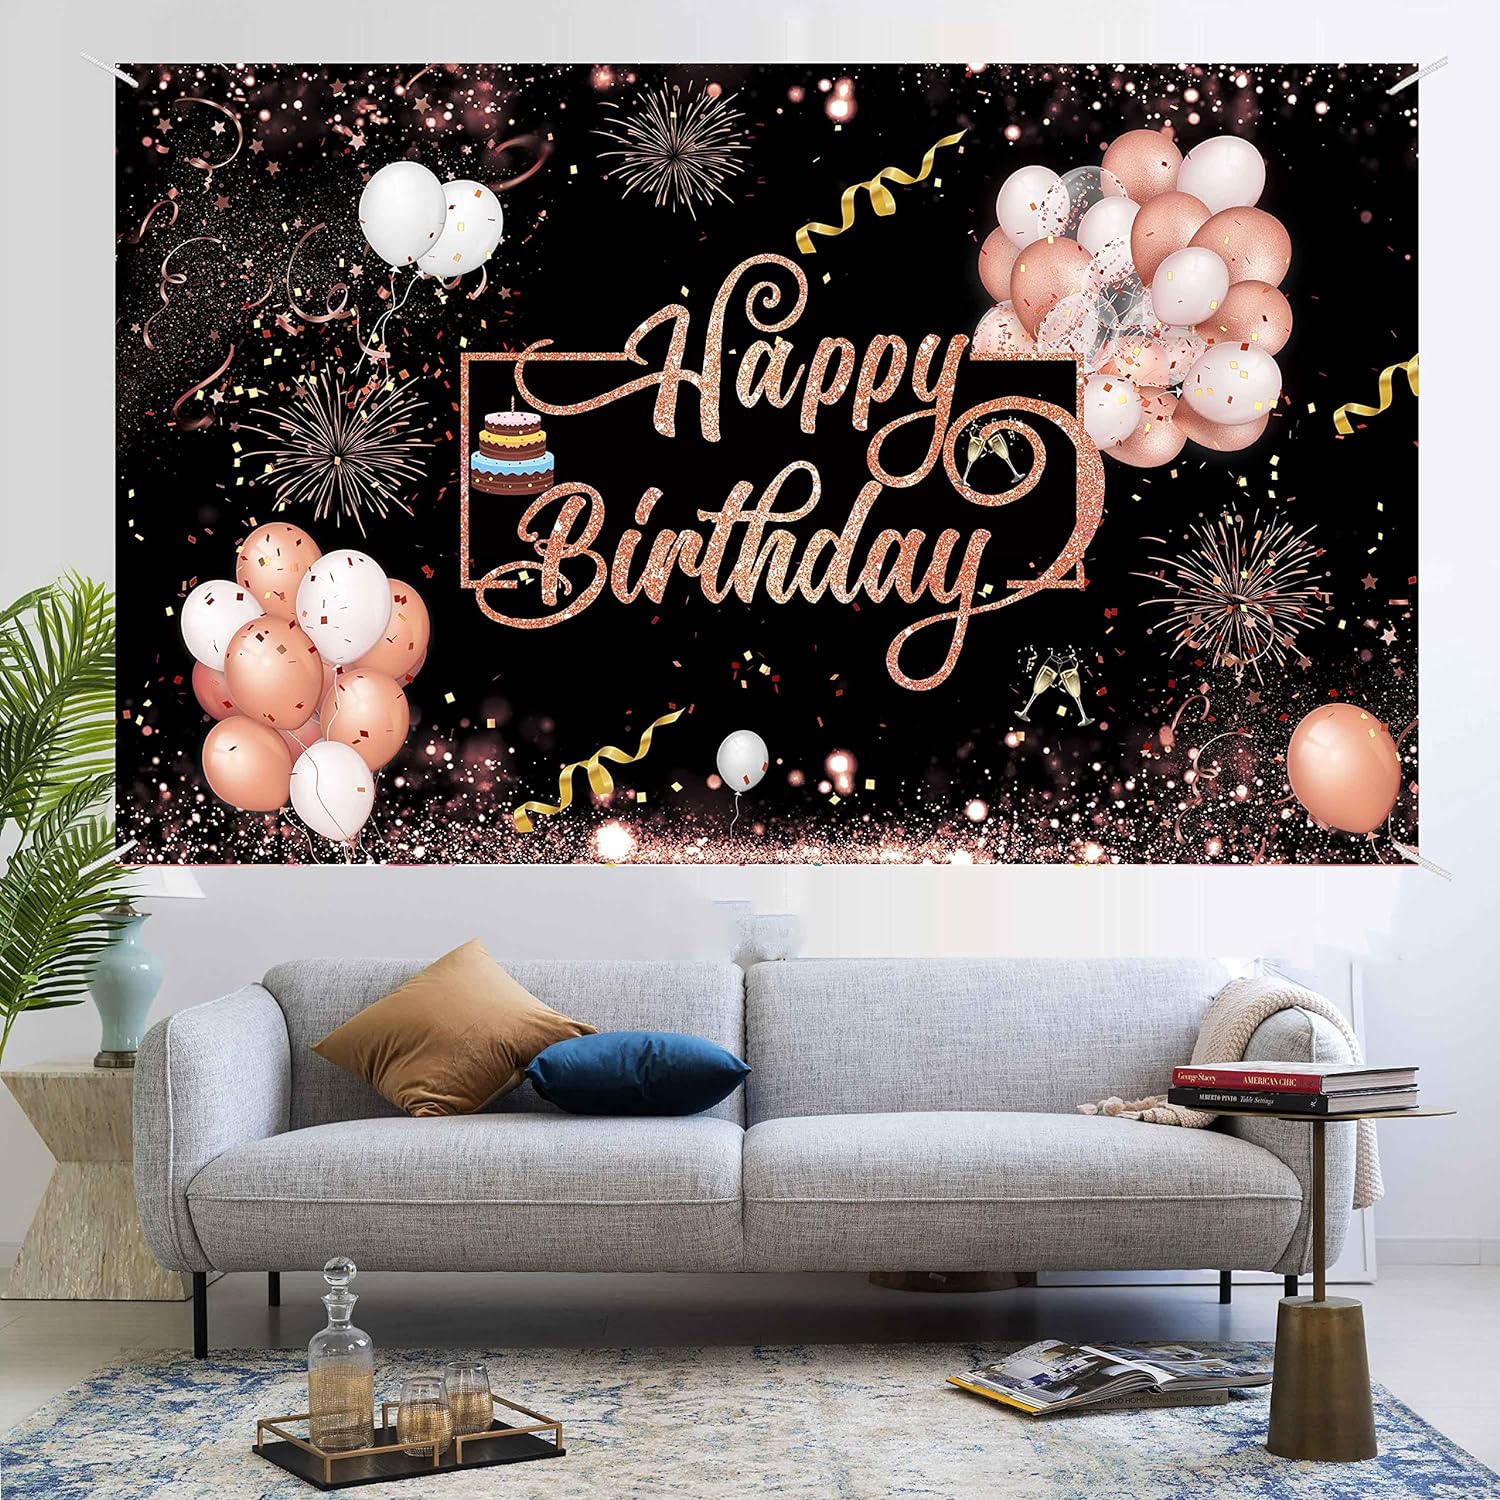 thinkstar Rose Gold Happy Birthday Theme Fabric Sign Poster Banner Backdrop With Firework,Star,Balloons,Cakes Pattern For Brithday Phot…